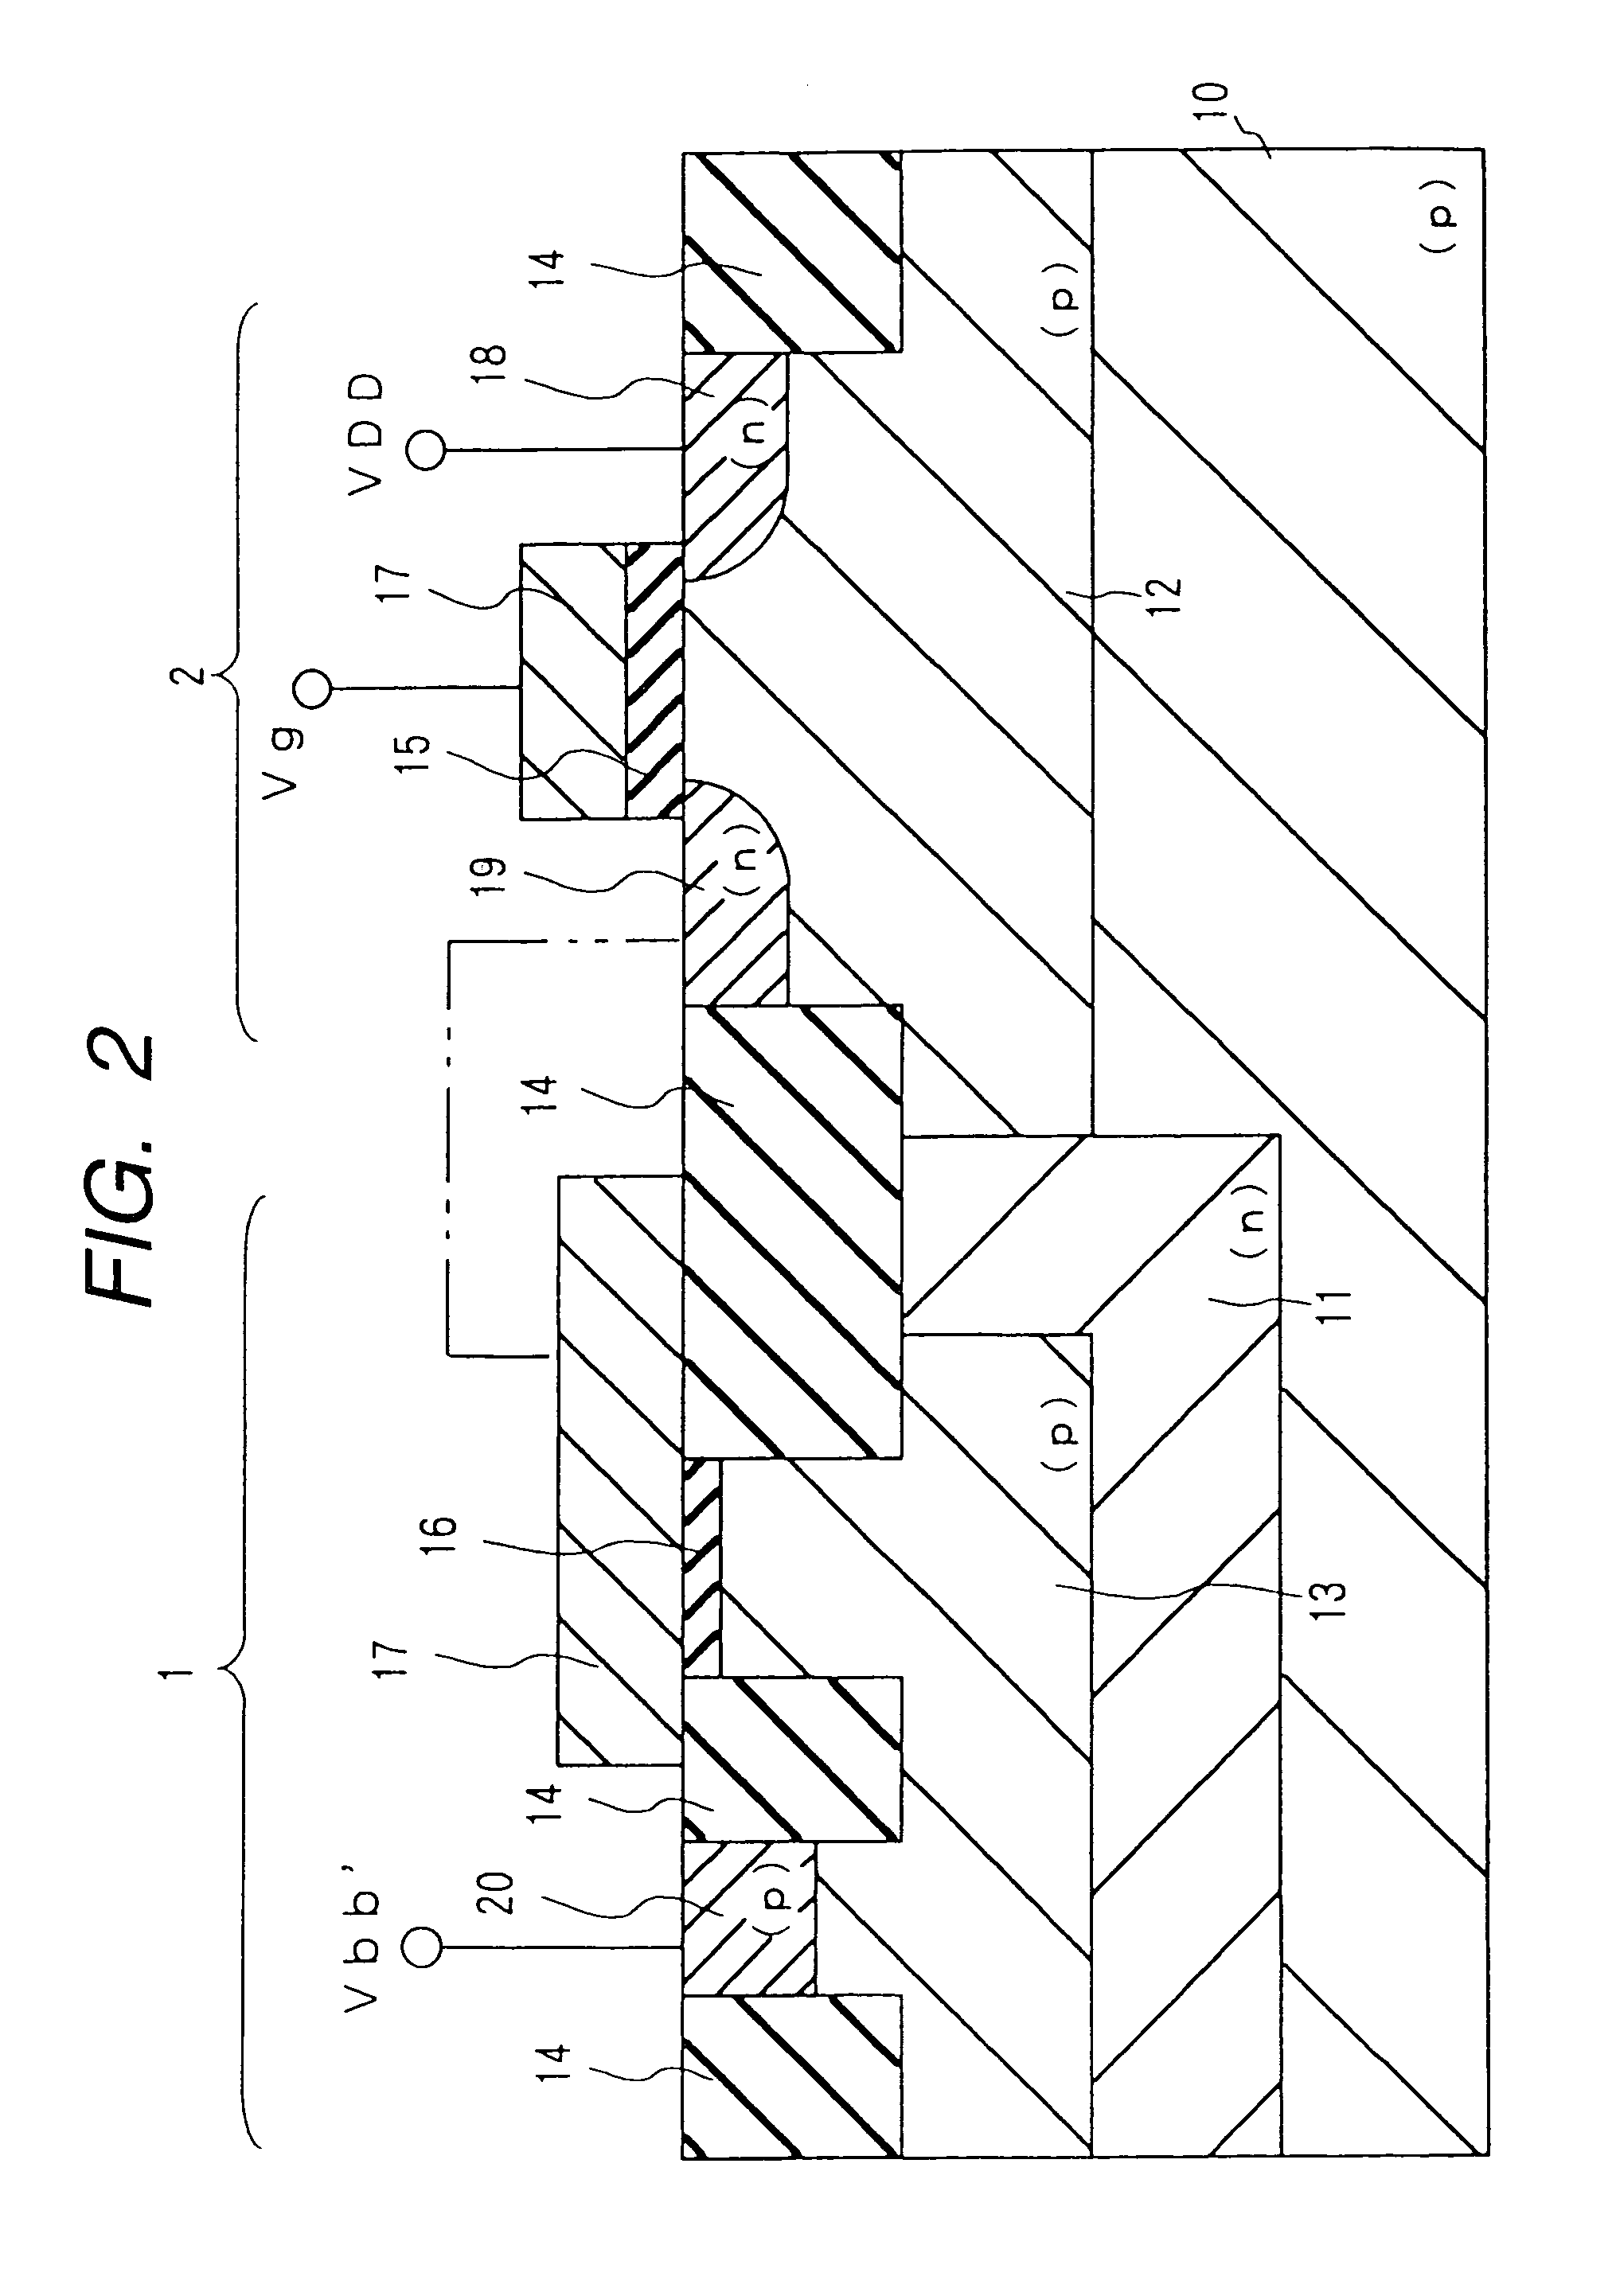 Semiconductor integrated circuit device having particular testing pad arrangement